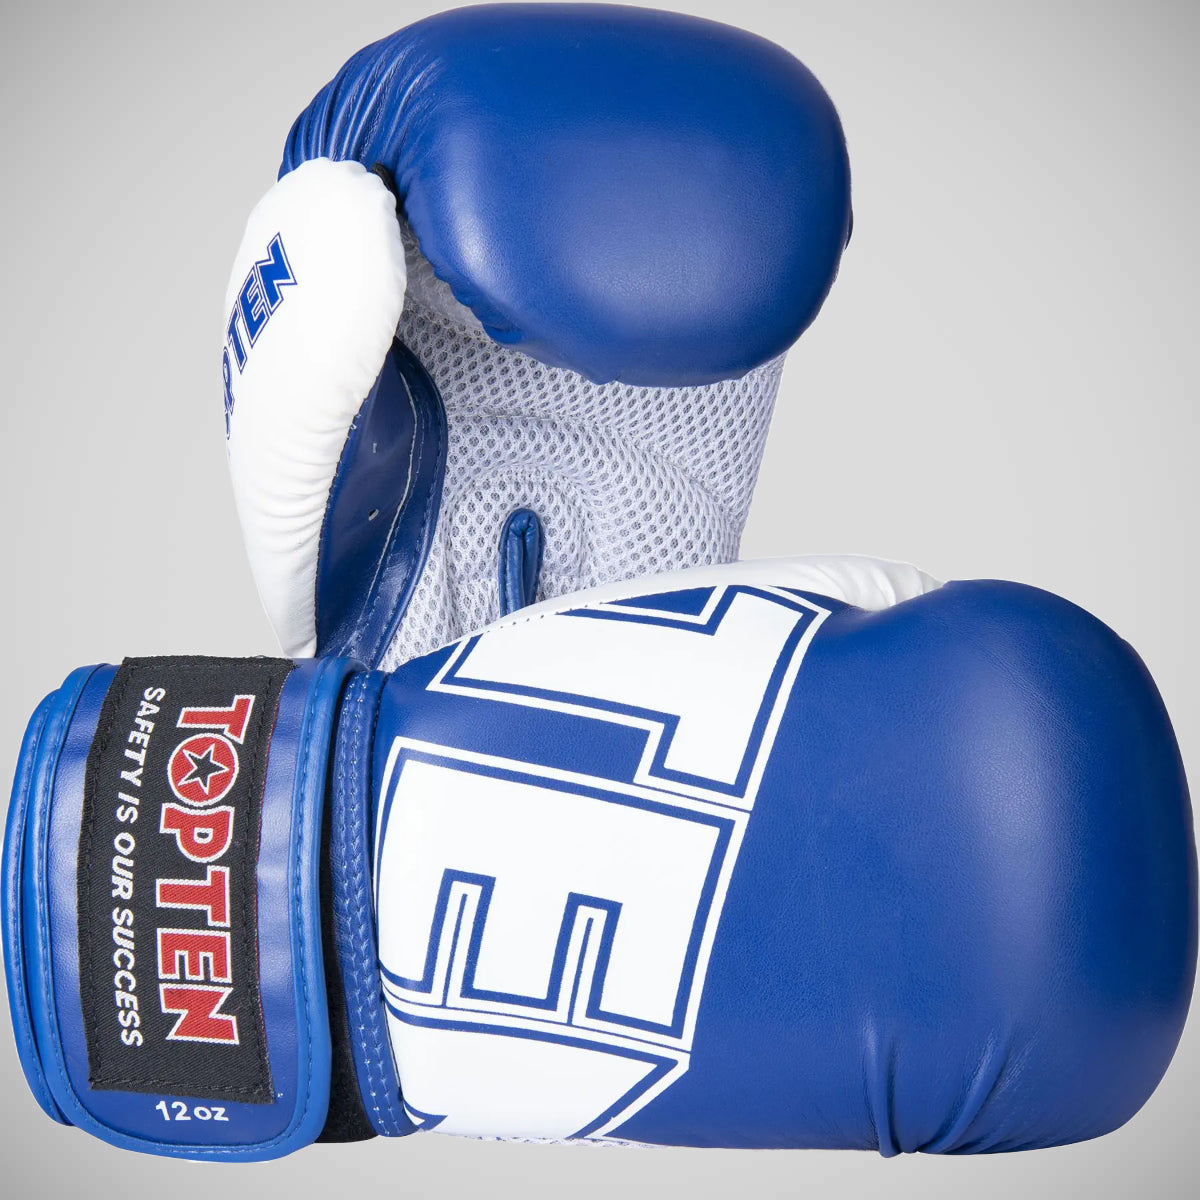 Hook & Loop Boxing Gloves from Made4Fighters